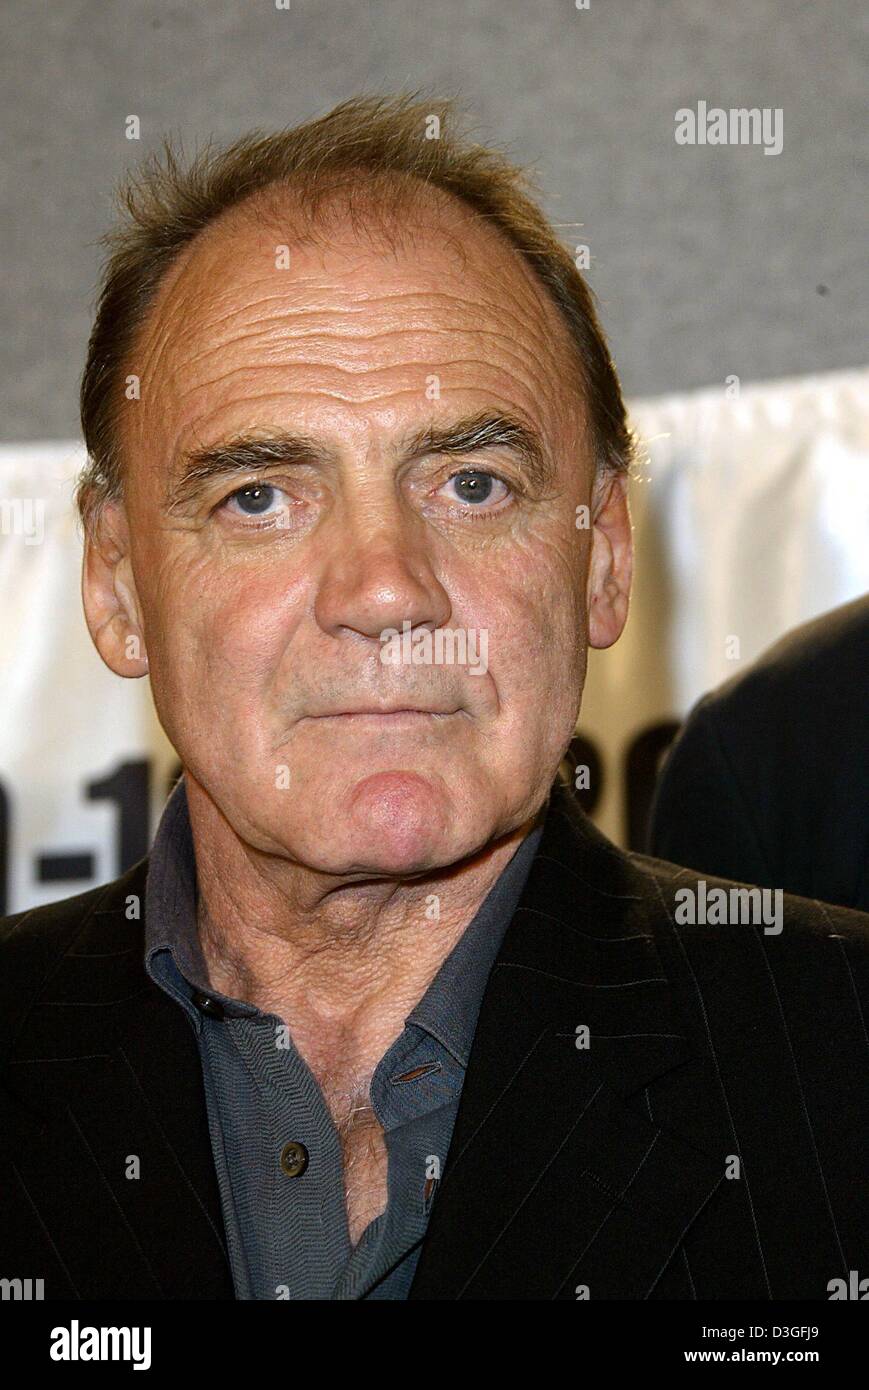 (dpa) - Actor Bruno Ganz presents his new movie 'The Downfall - Hitler and the End of the Third Reich' at the Film Festival in Toronto, Canada, 14 September 2004. Stock Photo